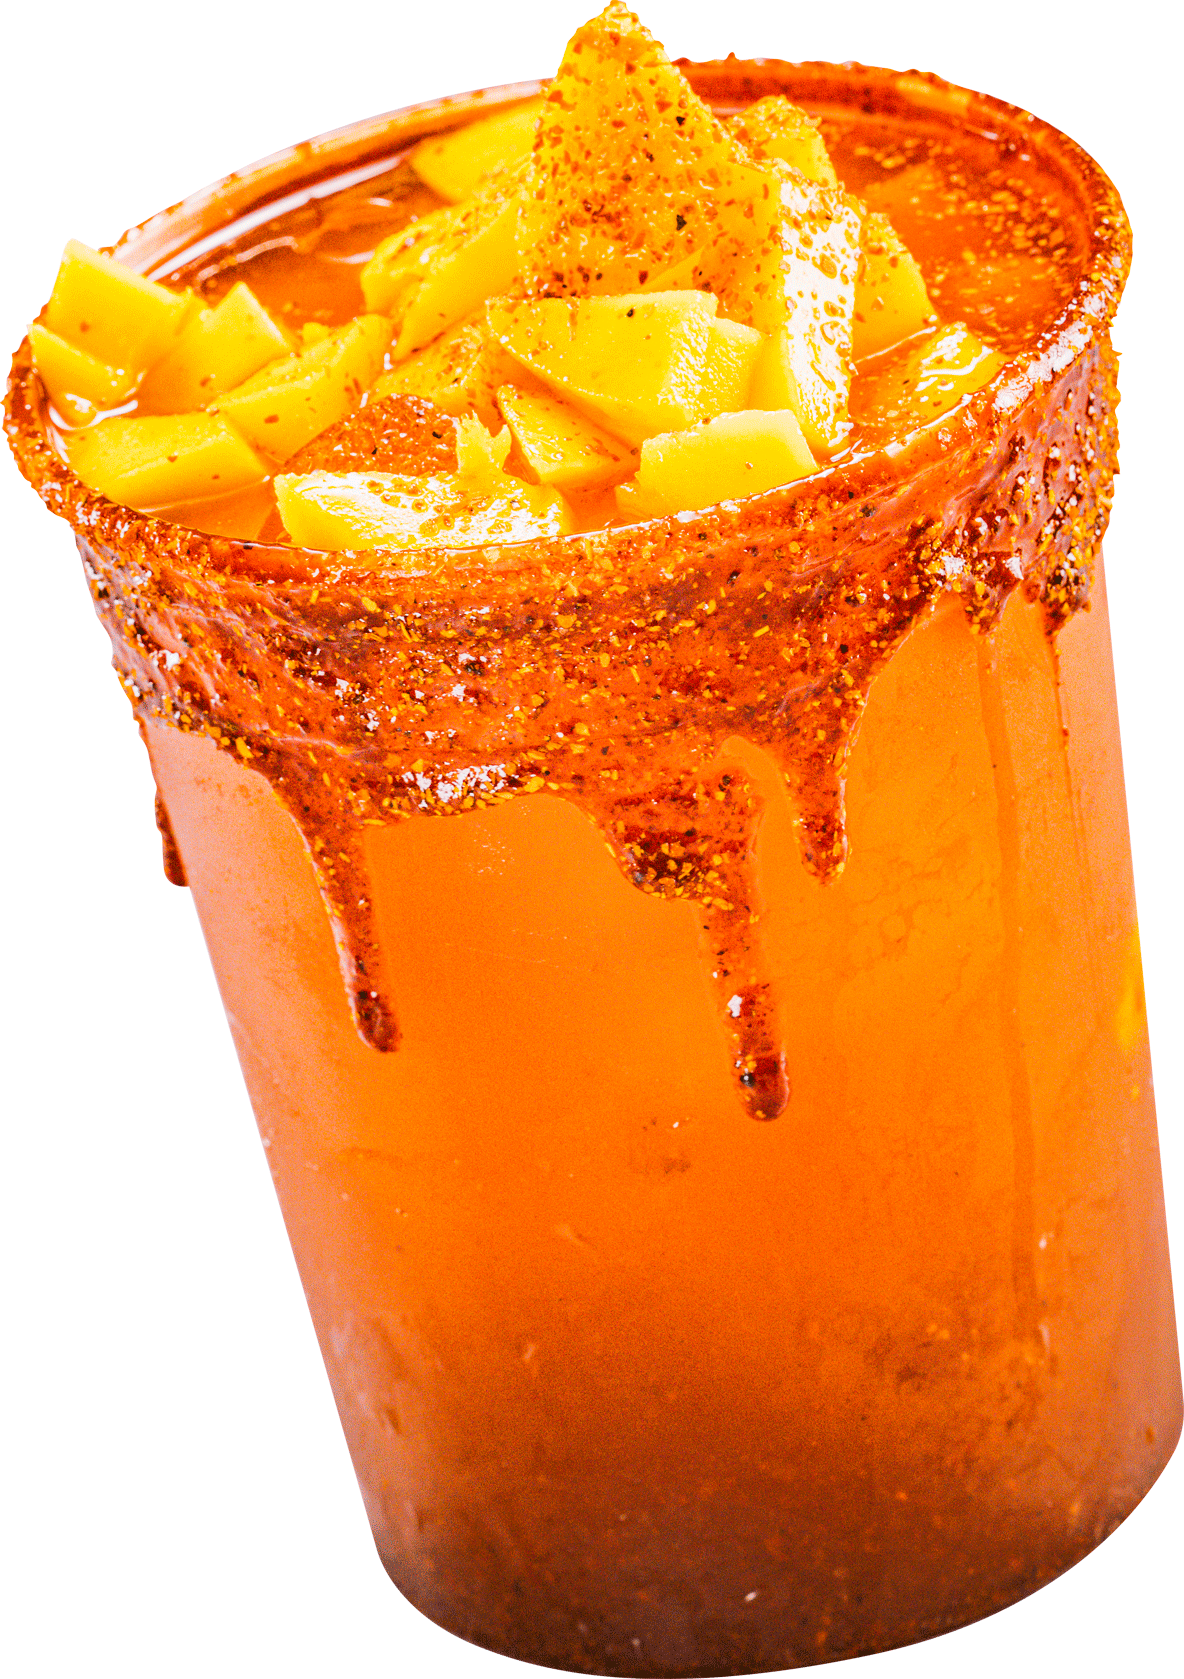 A close up of a cup of orange liquid with slices of mango on top.